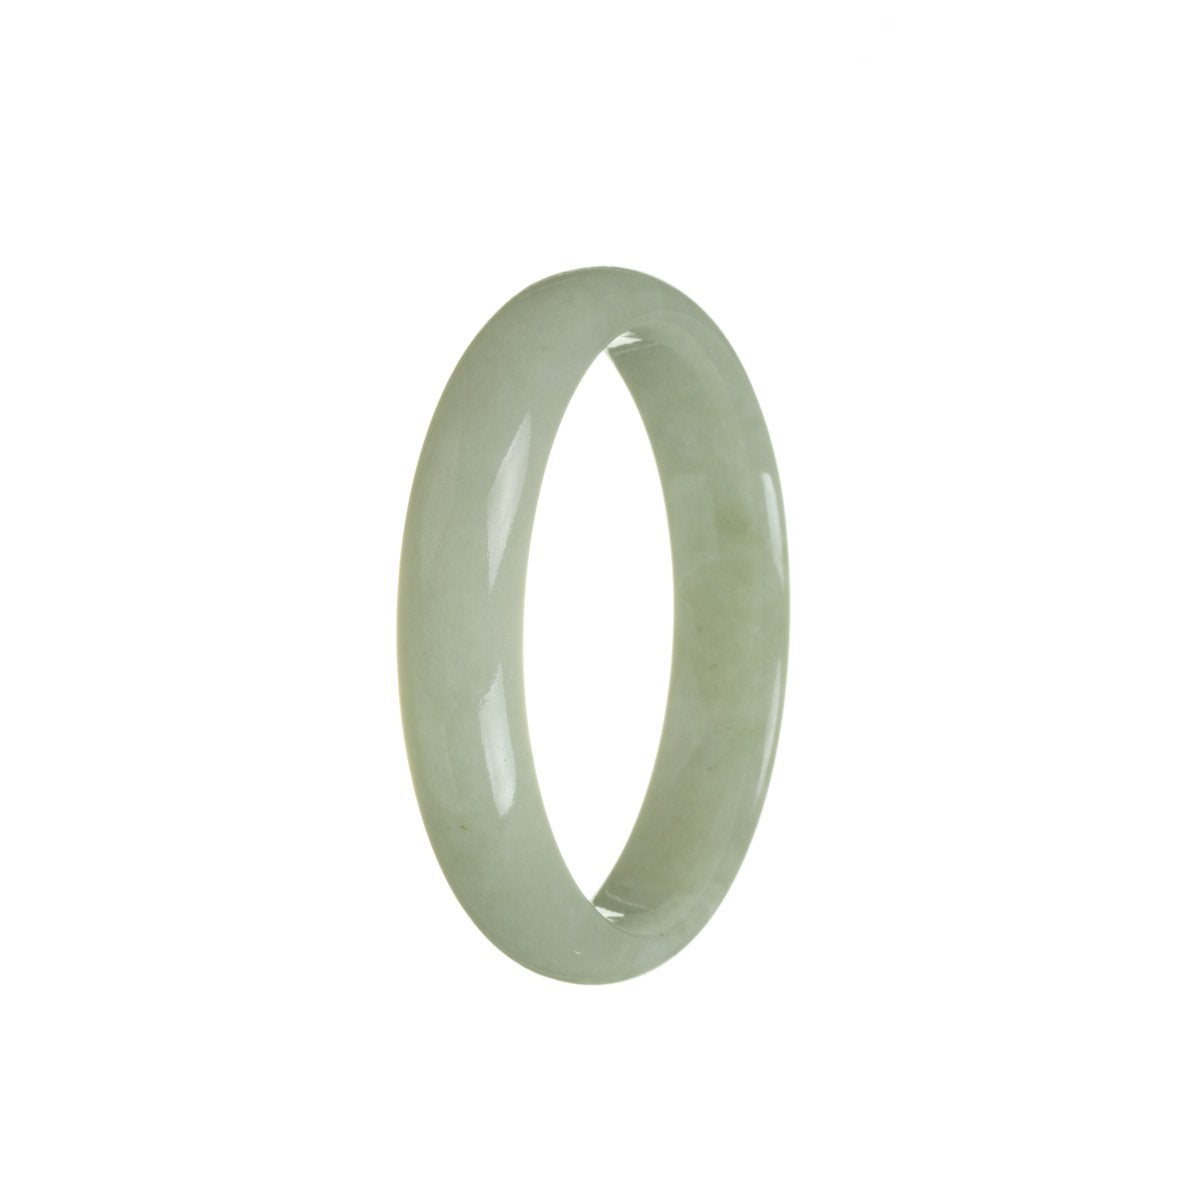 A pale green traditional jade bracelet with a 55mm half moon shape. Certified as natural and authentic. Sold by MAYS GEMS.